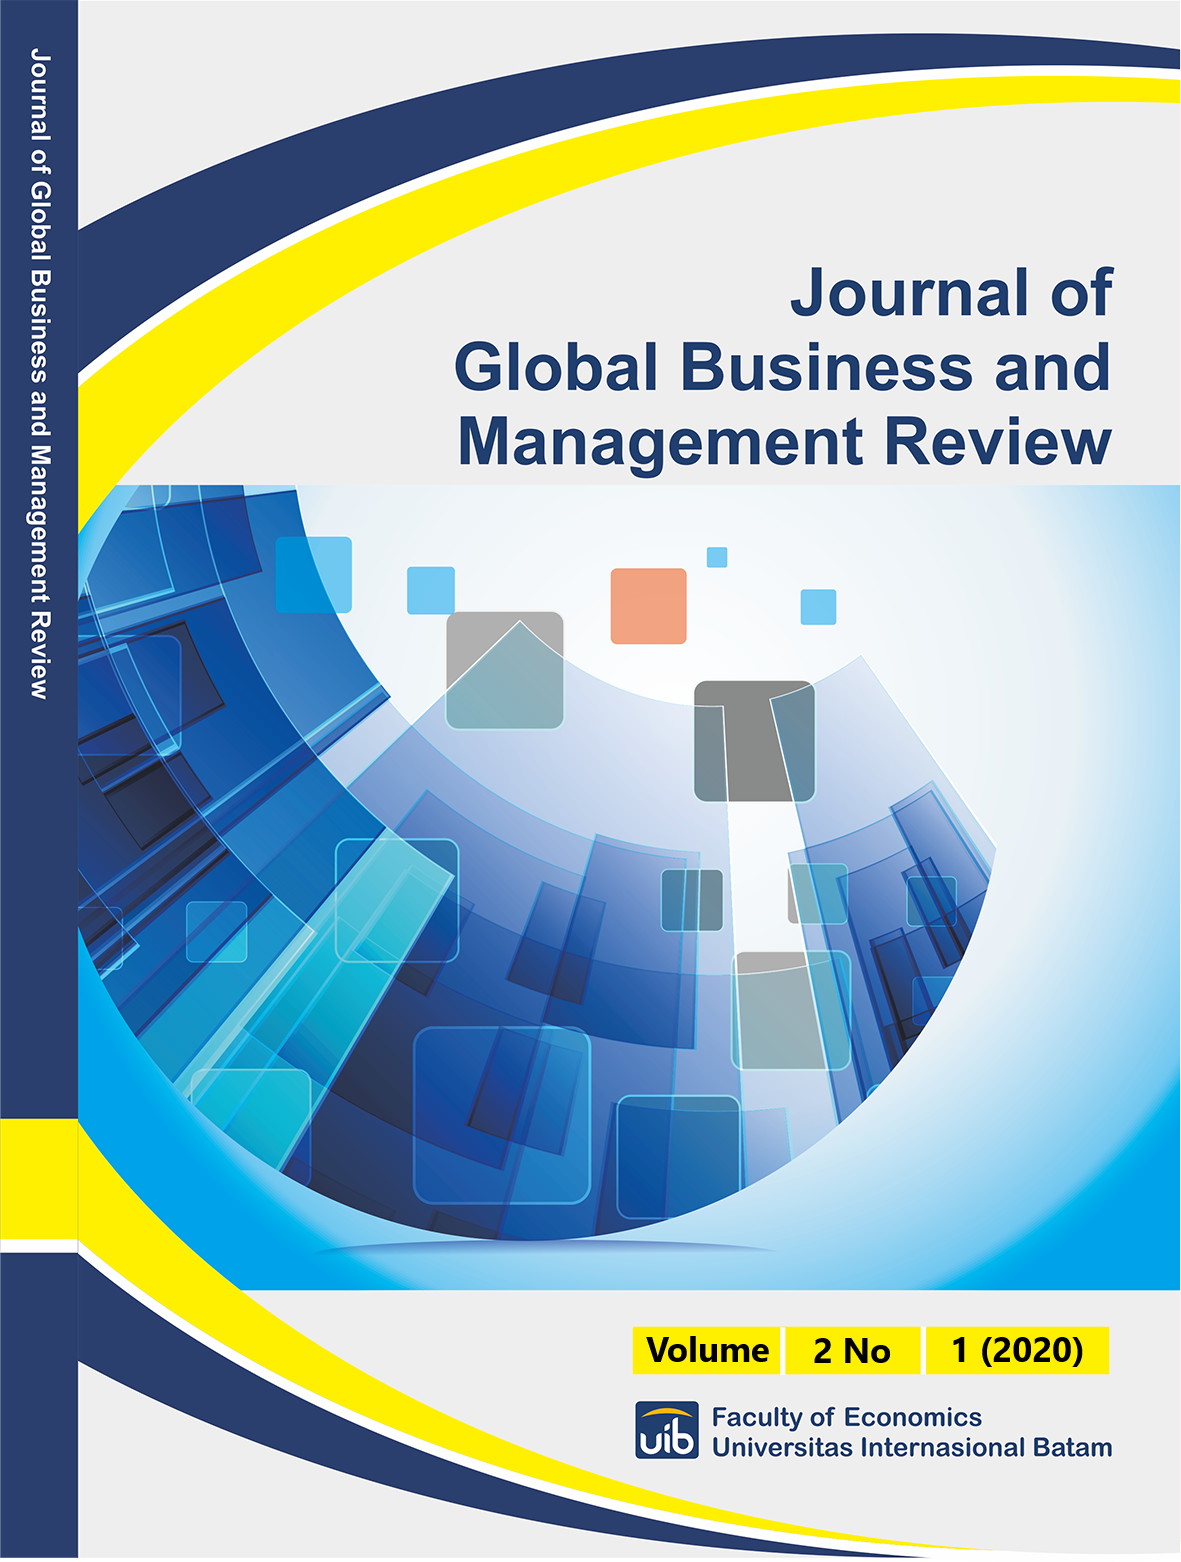 					View Vol. 2 No. 1 (2020): Journal of Global Business and Management Review
				